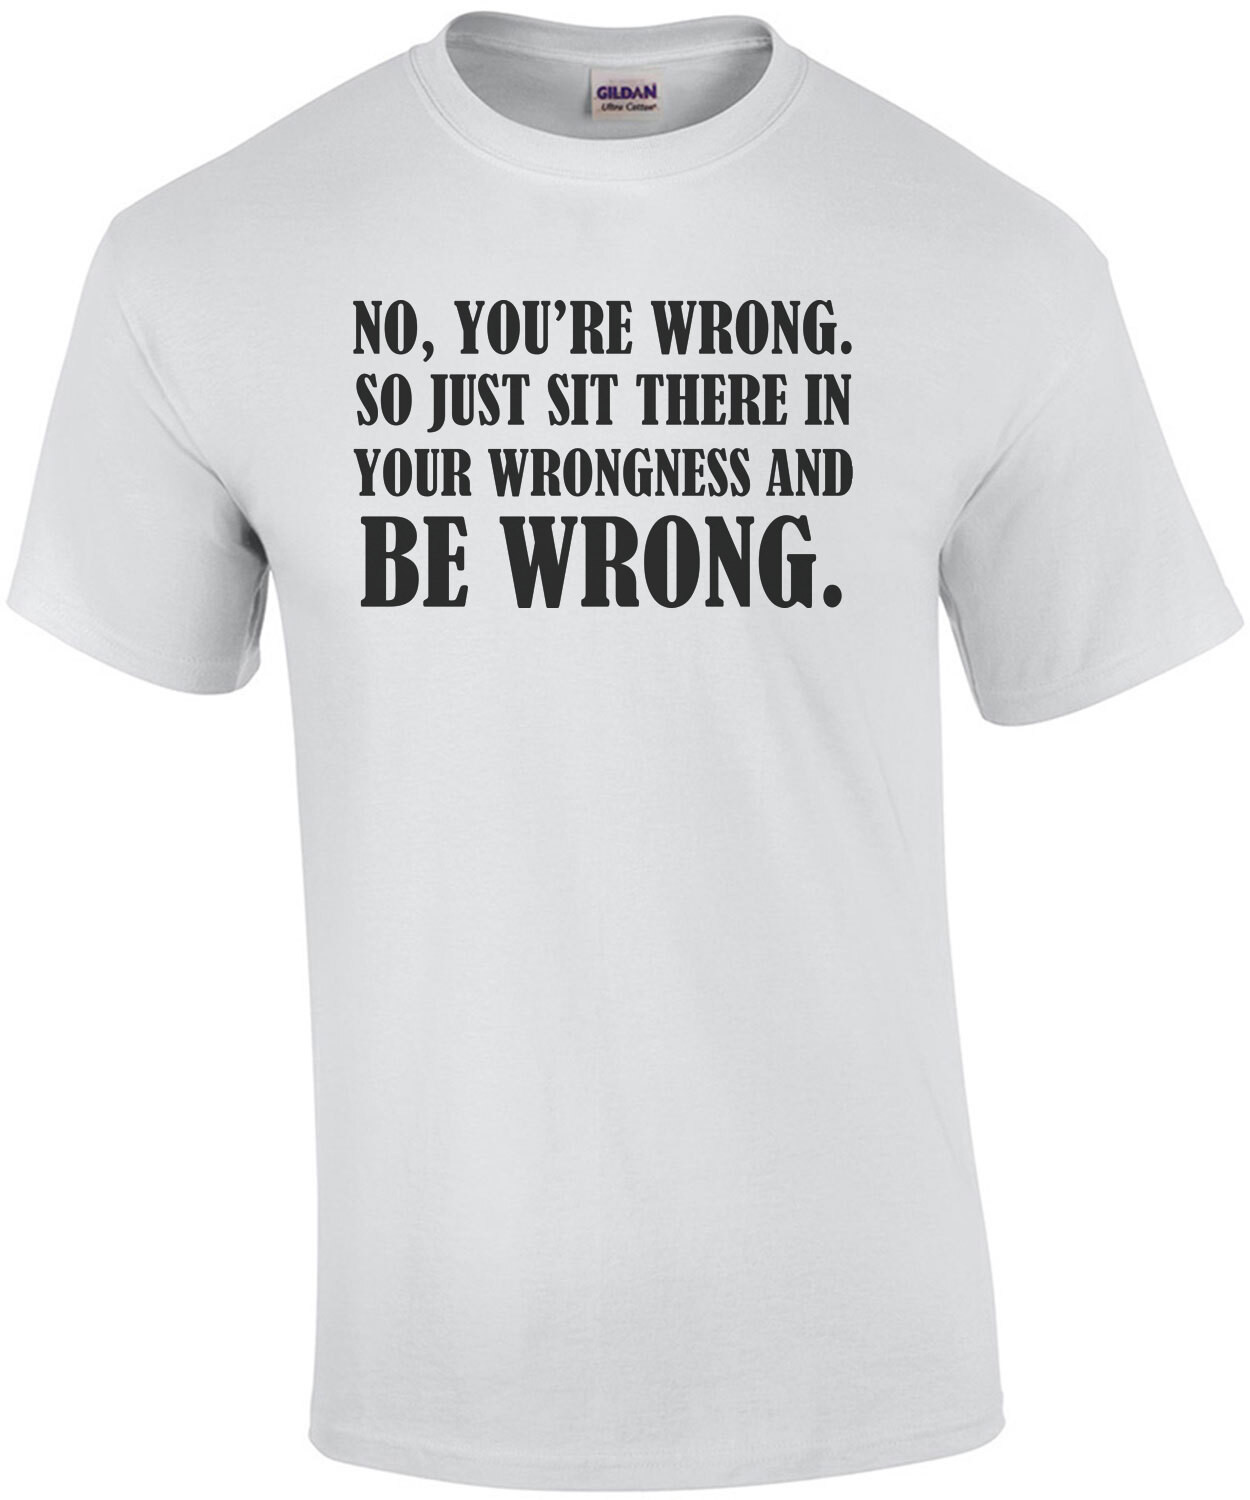 No, you're wrong. So just sit there in your wrongness and be wrong - funny t-shirt